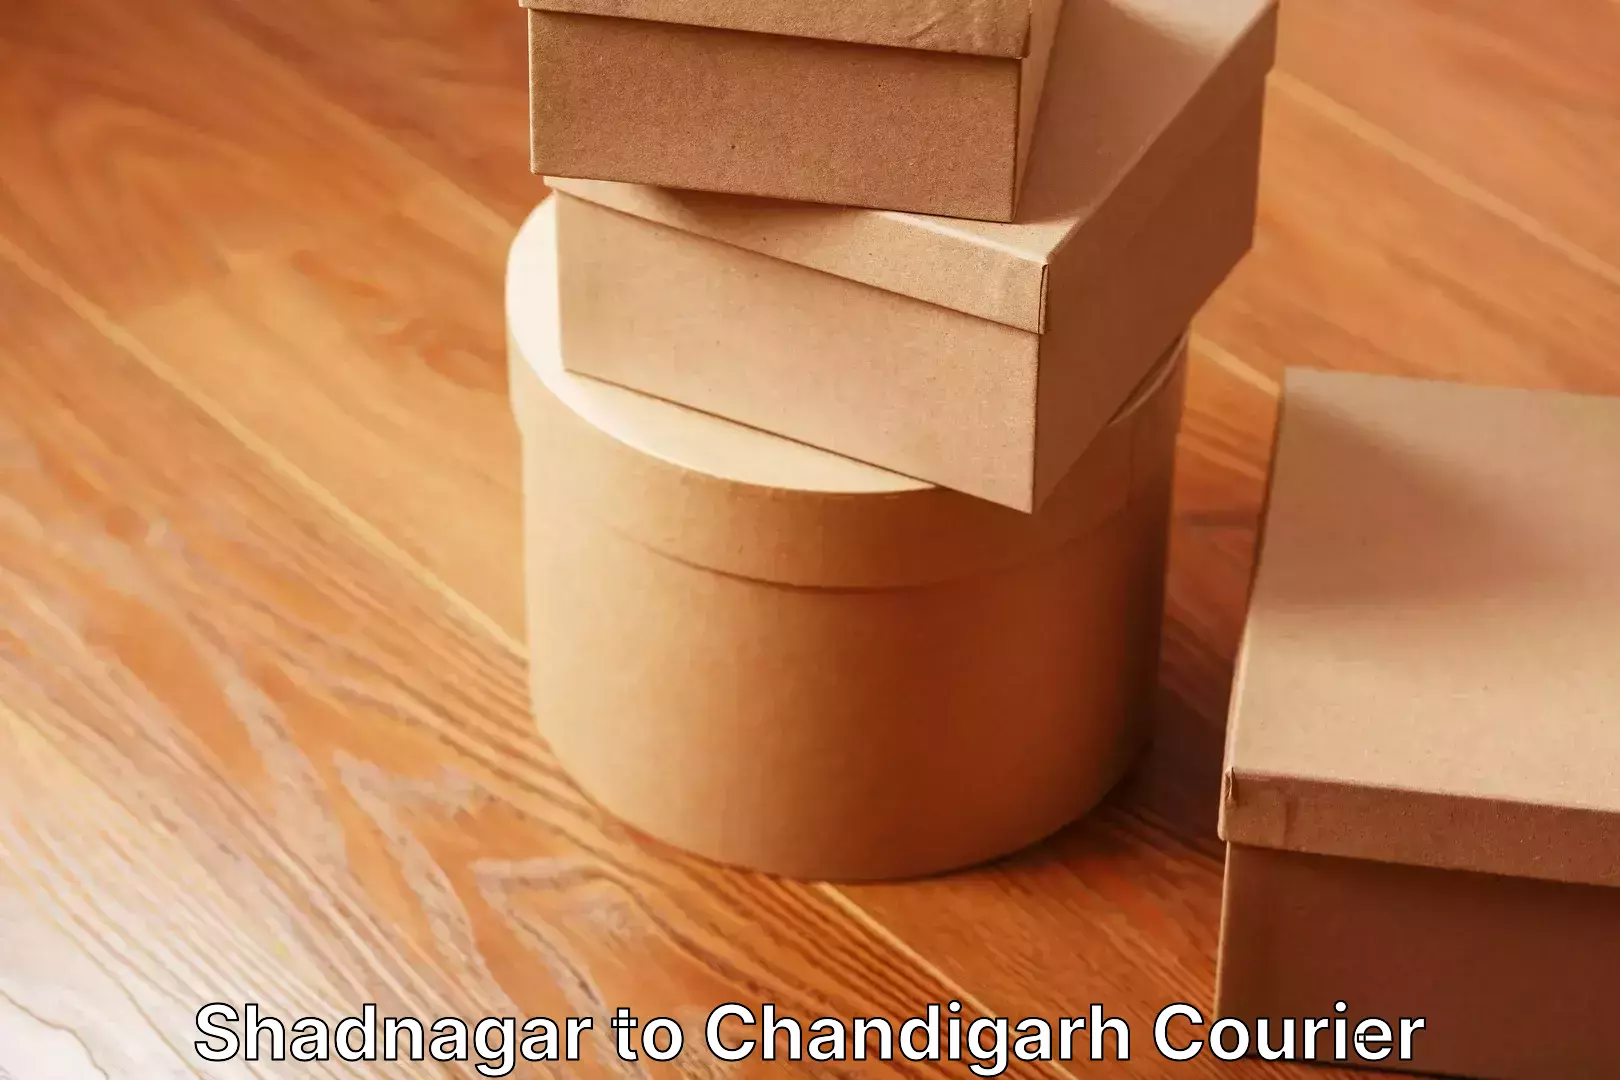 Trusted relocation experts Shadnagar to Chandigarh